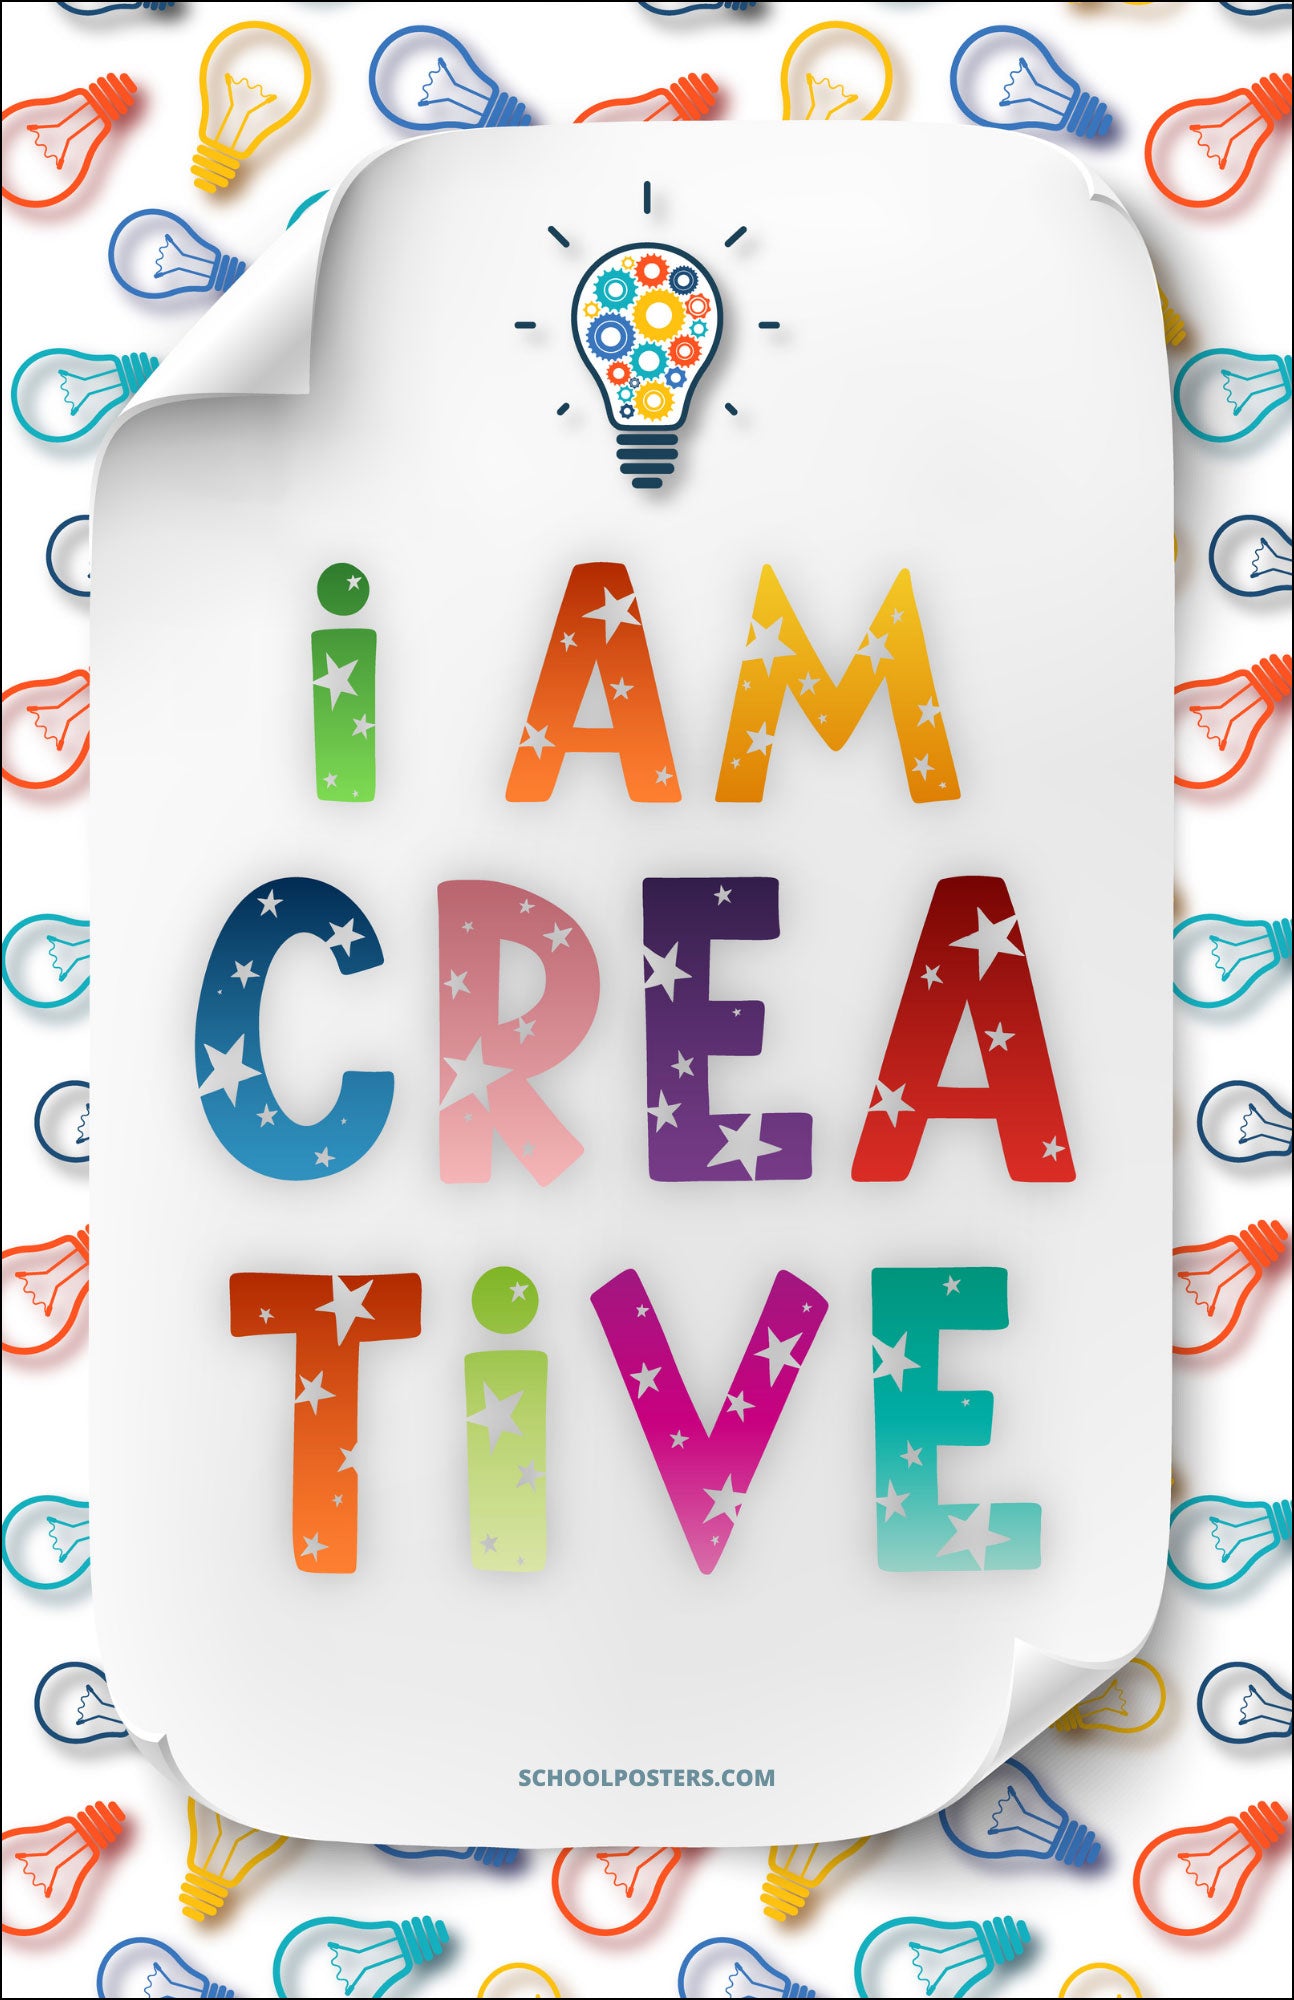 Elementary Affirmations Poster